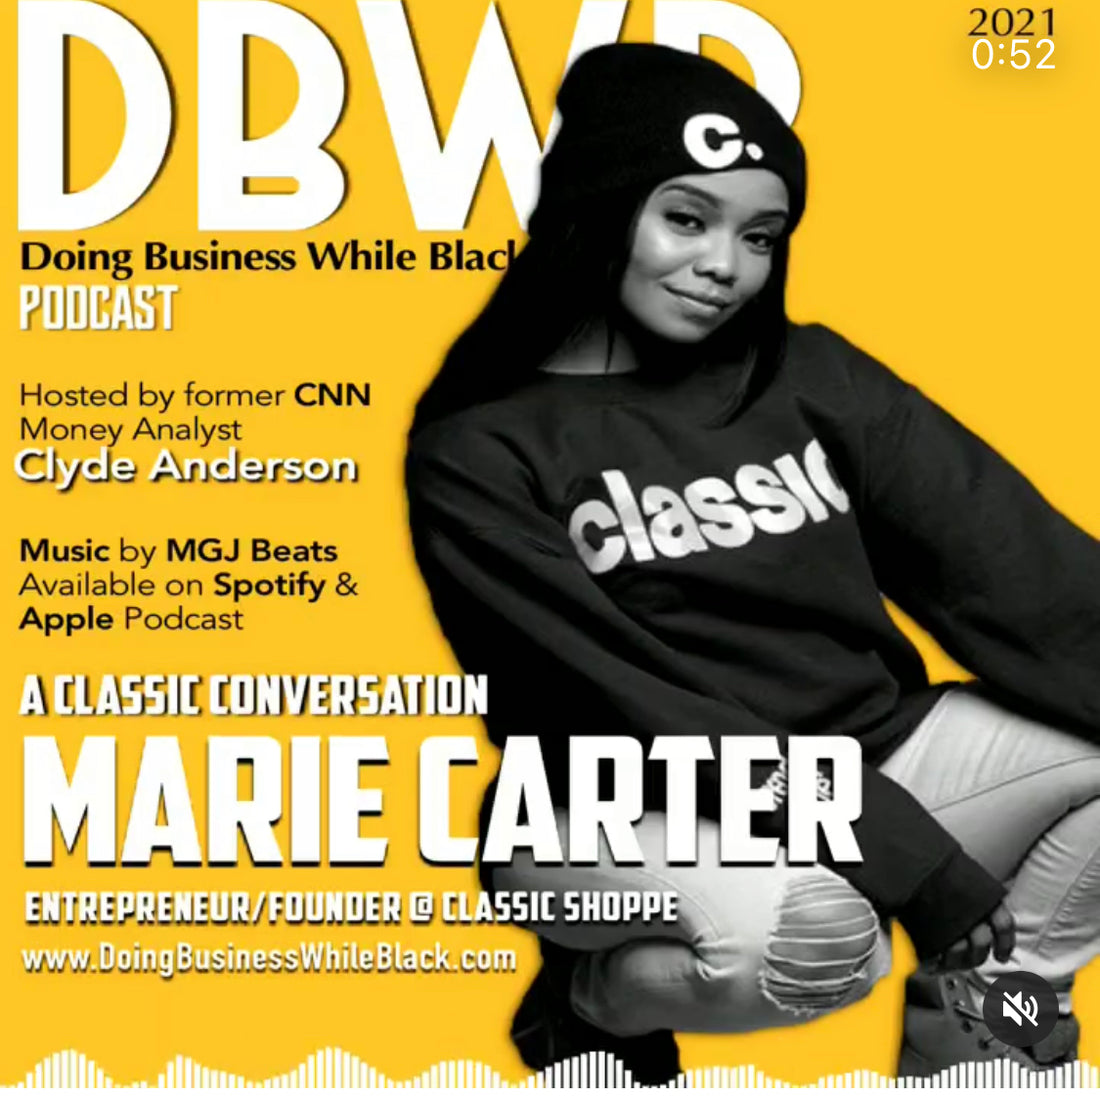 Check Us Out on the Doing Business While Black Podcast